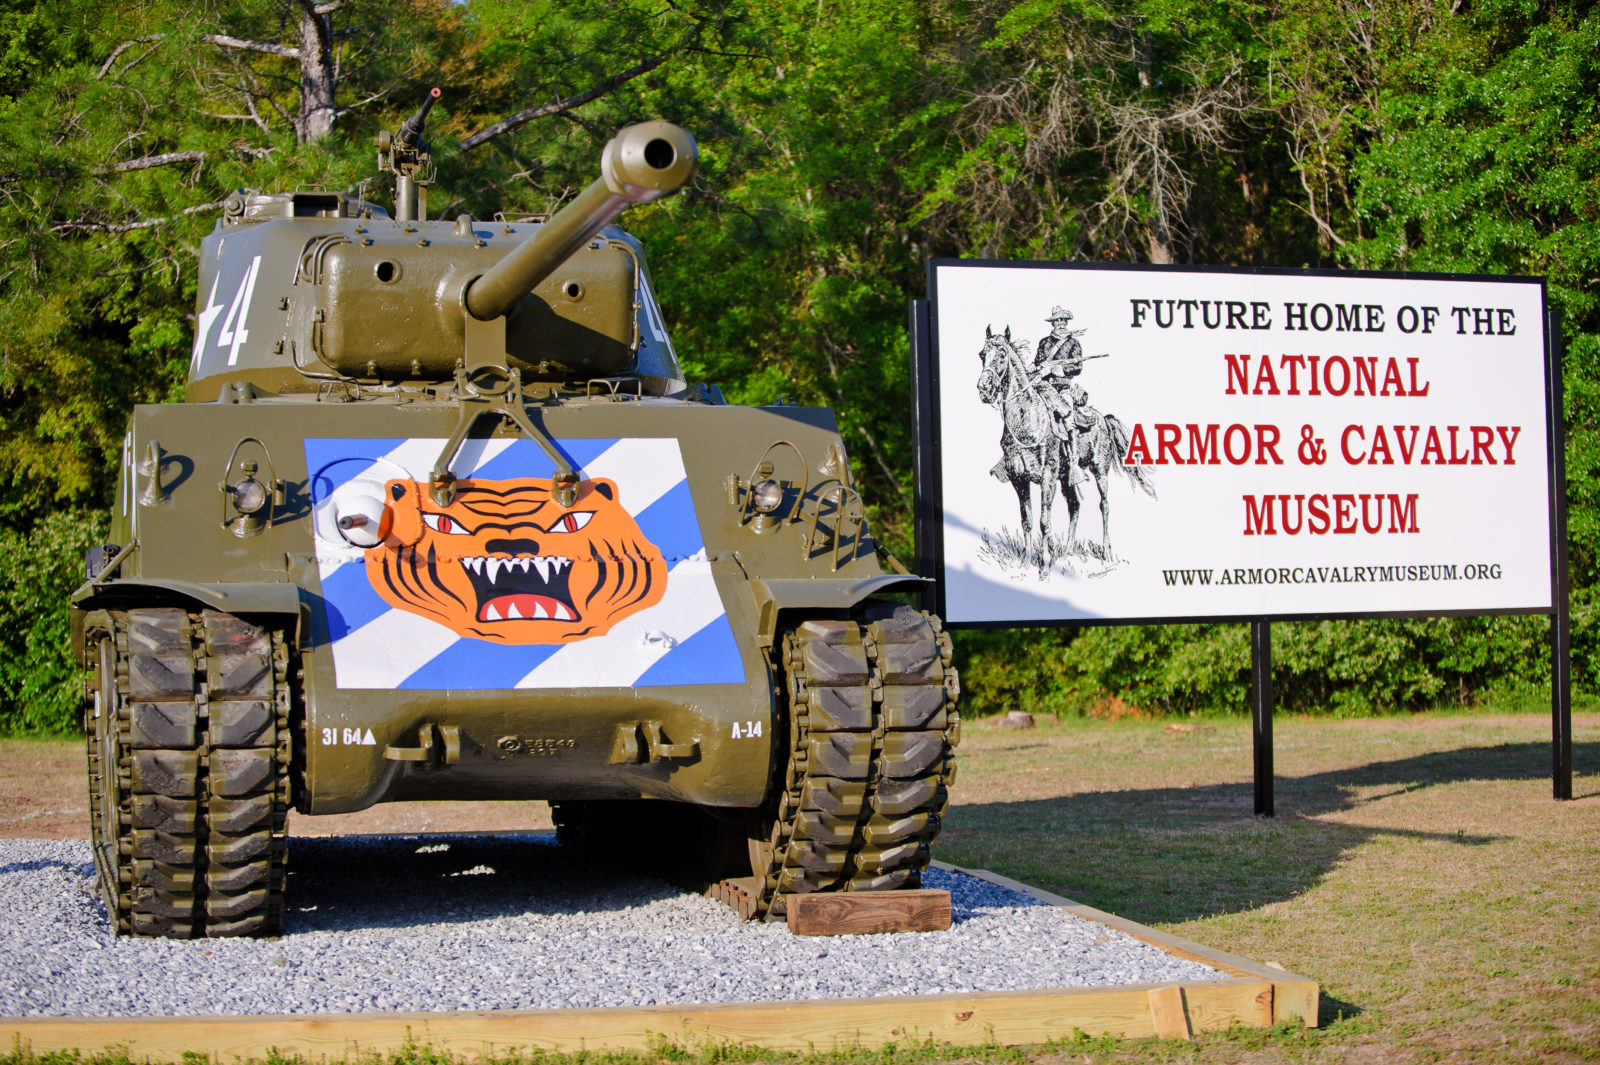 04 APR 2011 - National Armor and Cavalry Museum sign, MCoE, Fort Benning, GA.  Photo by John D. Helms - john.d.helms@us.army.mil